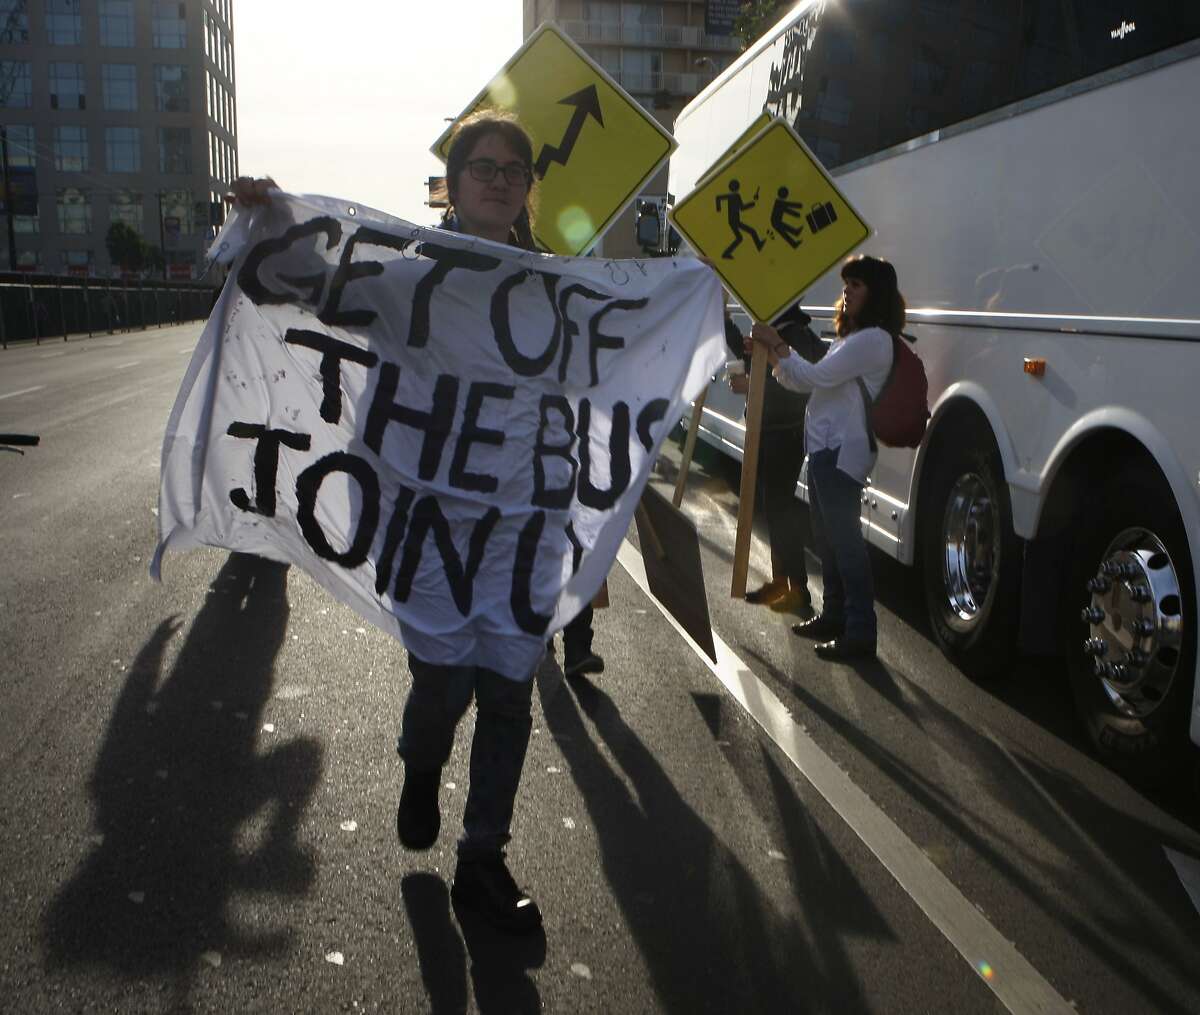 Protestors block a Facebook bus heading to Menlo Park on 8th at Market streets in San Francisco, Calif., on Tuesday, January 22, 2014. The San Francisco Metropolitan Transportation Agency votes on an 18-month pilot plan allowing Google buses to use designated Muni bus stops to pick up and drop off tech commuters to Silicon Valley.